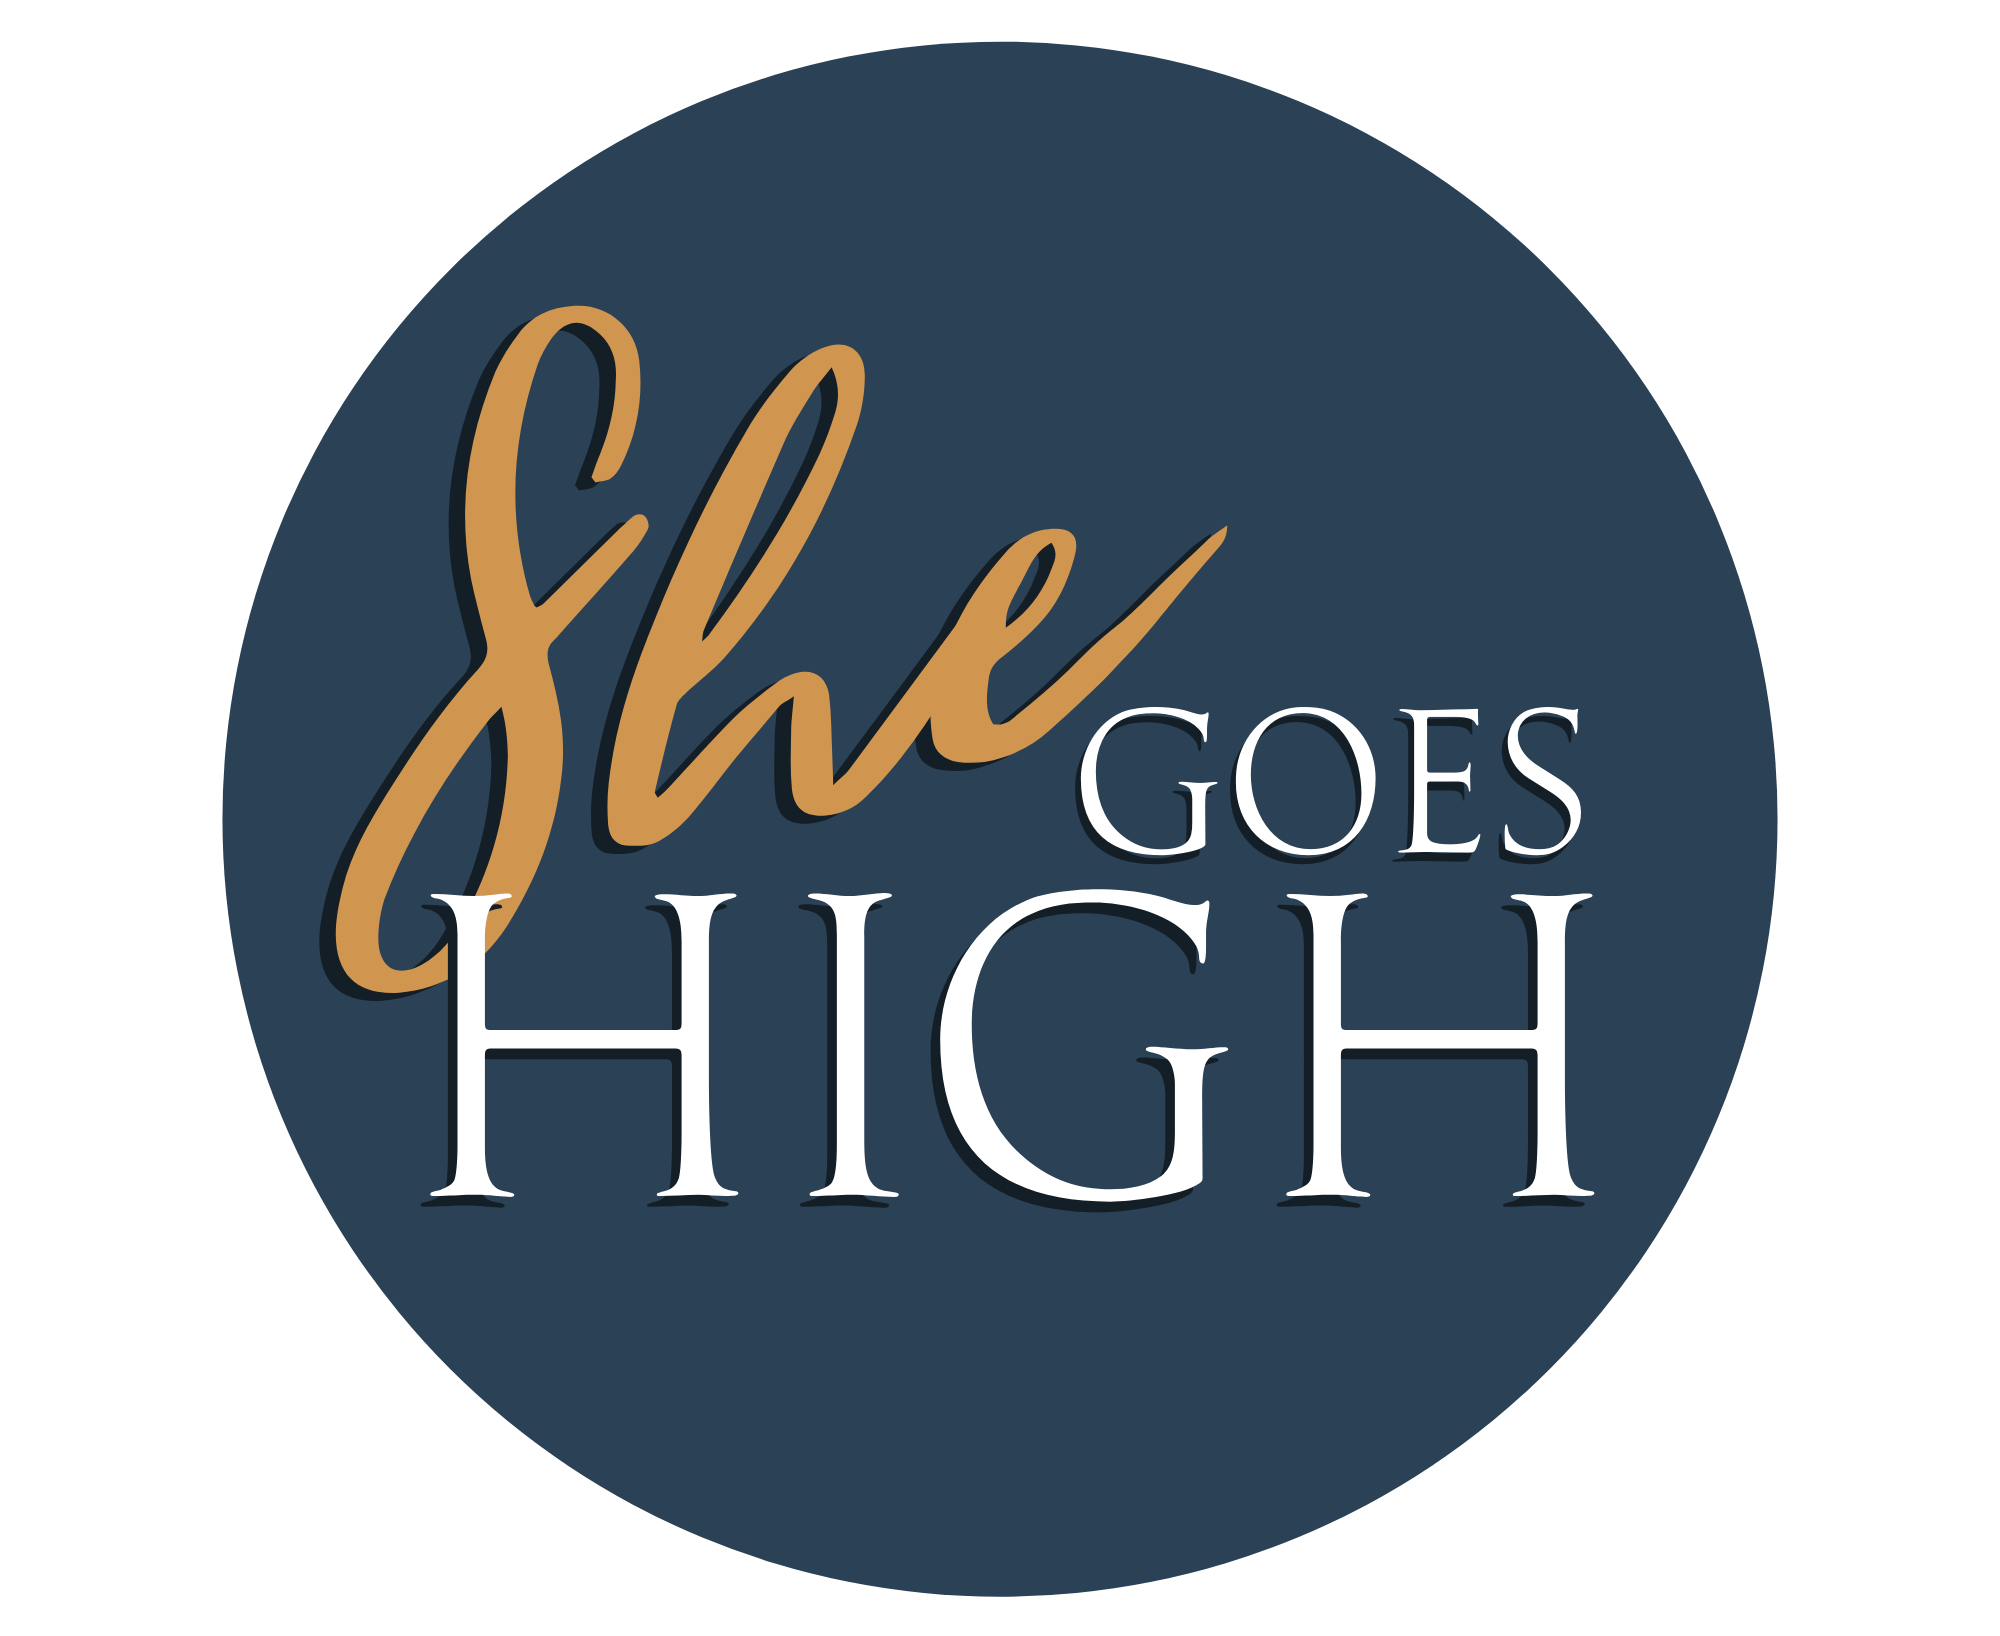 She Goes High logo -Circle with transparent background.png